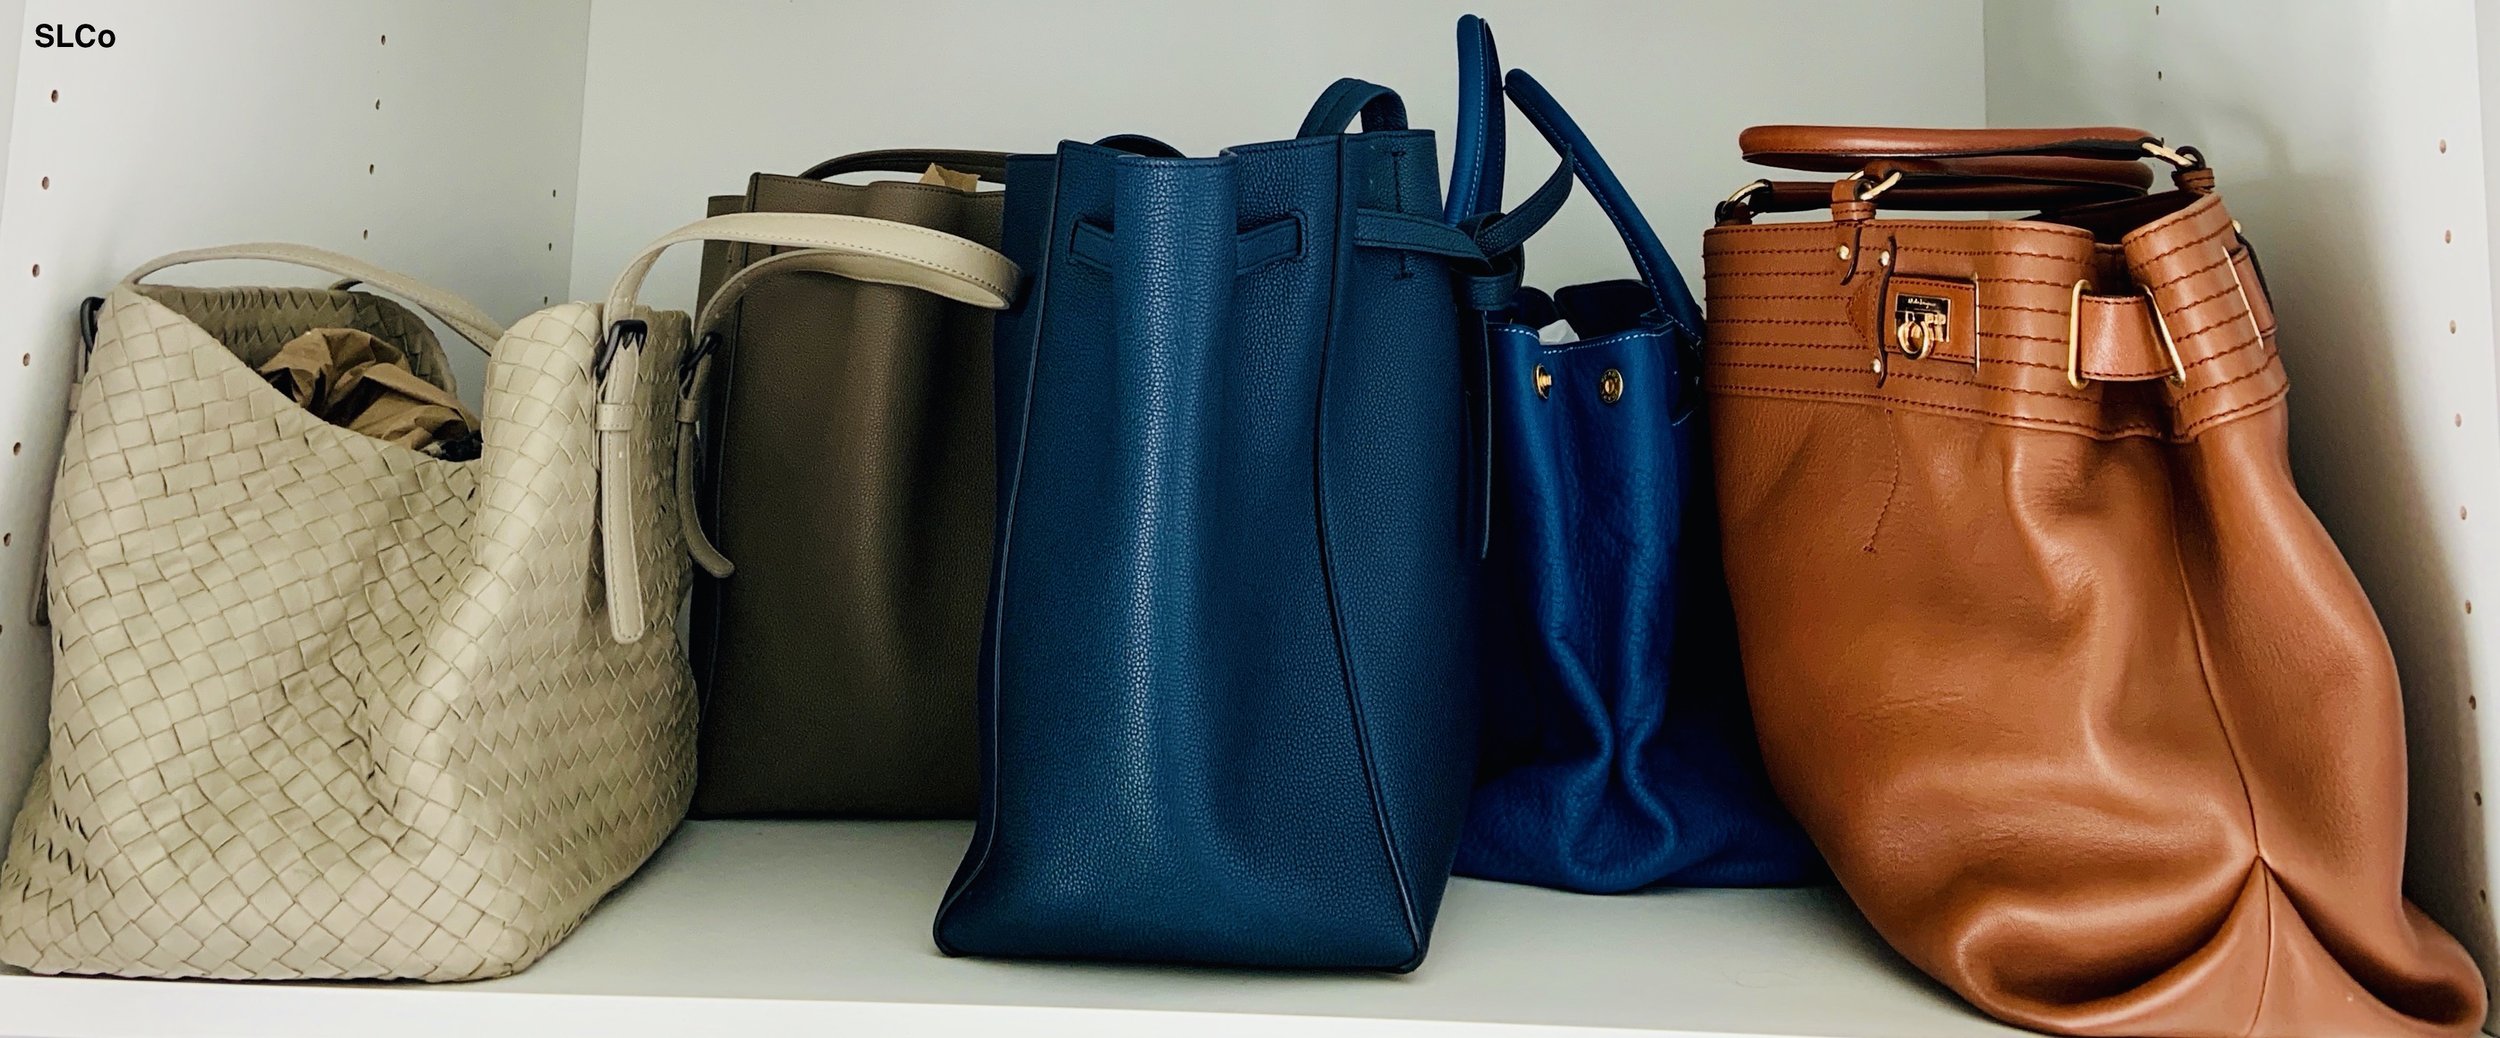 Close up image of blue and beige purses on a shelf.